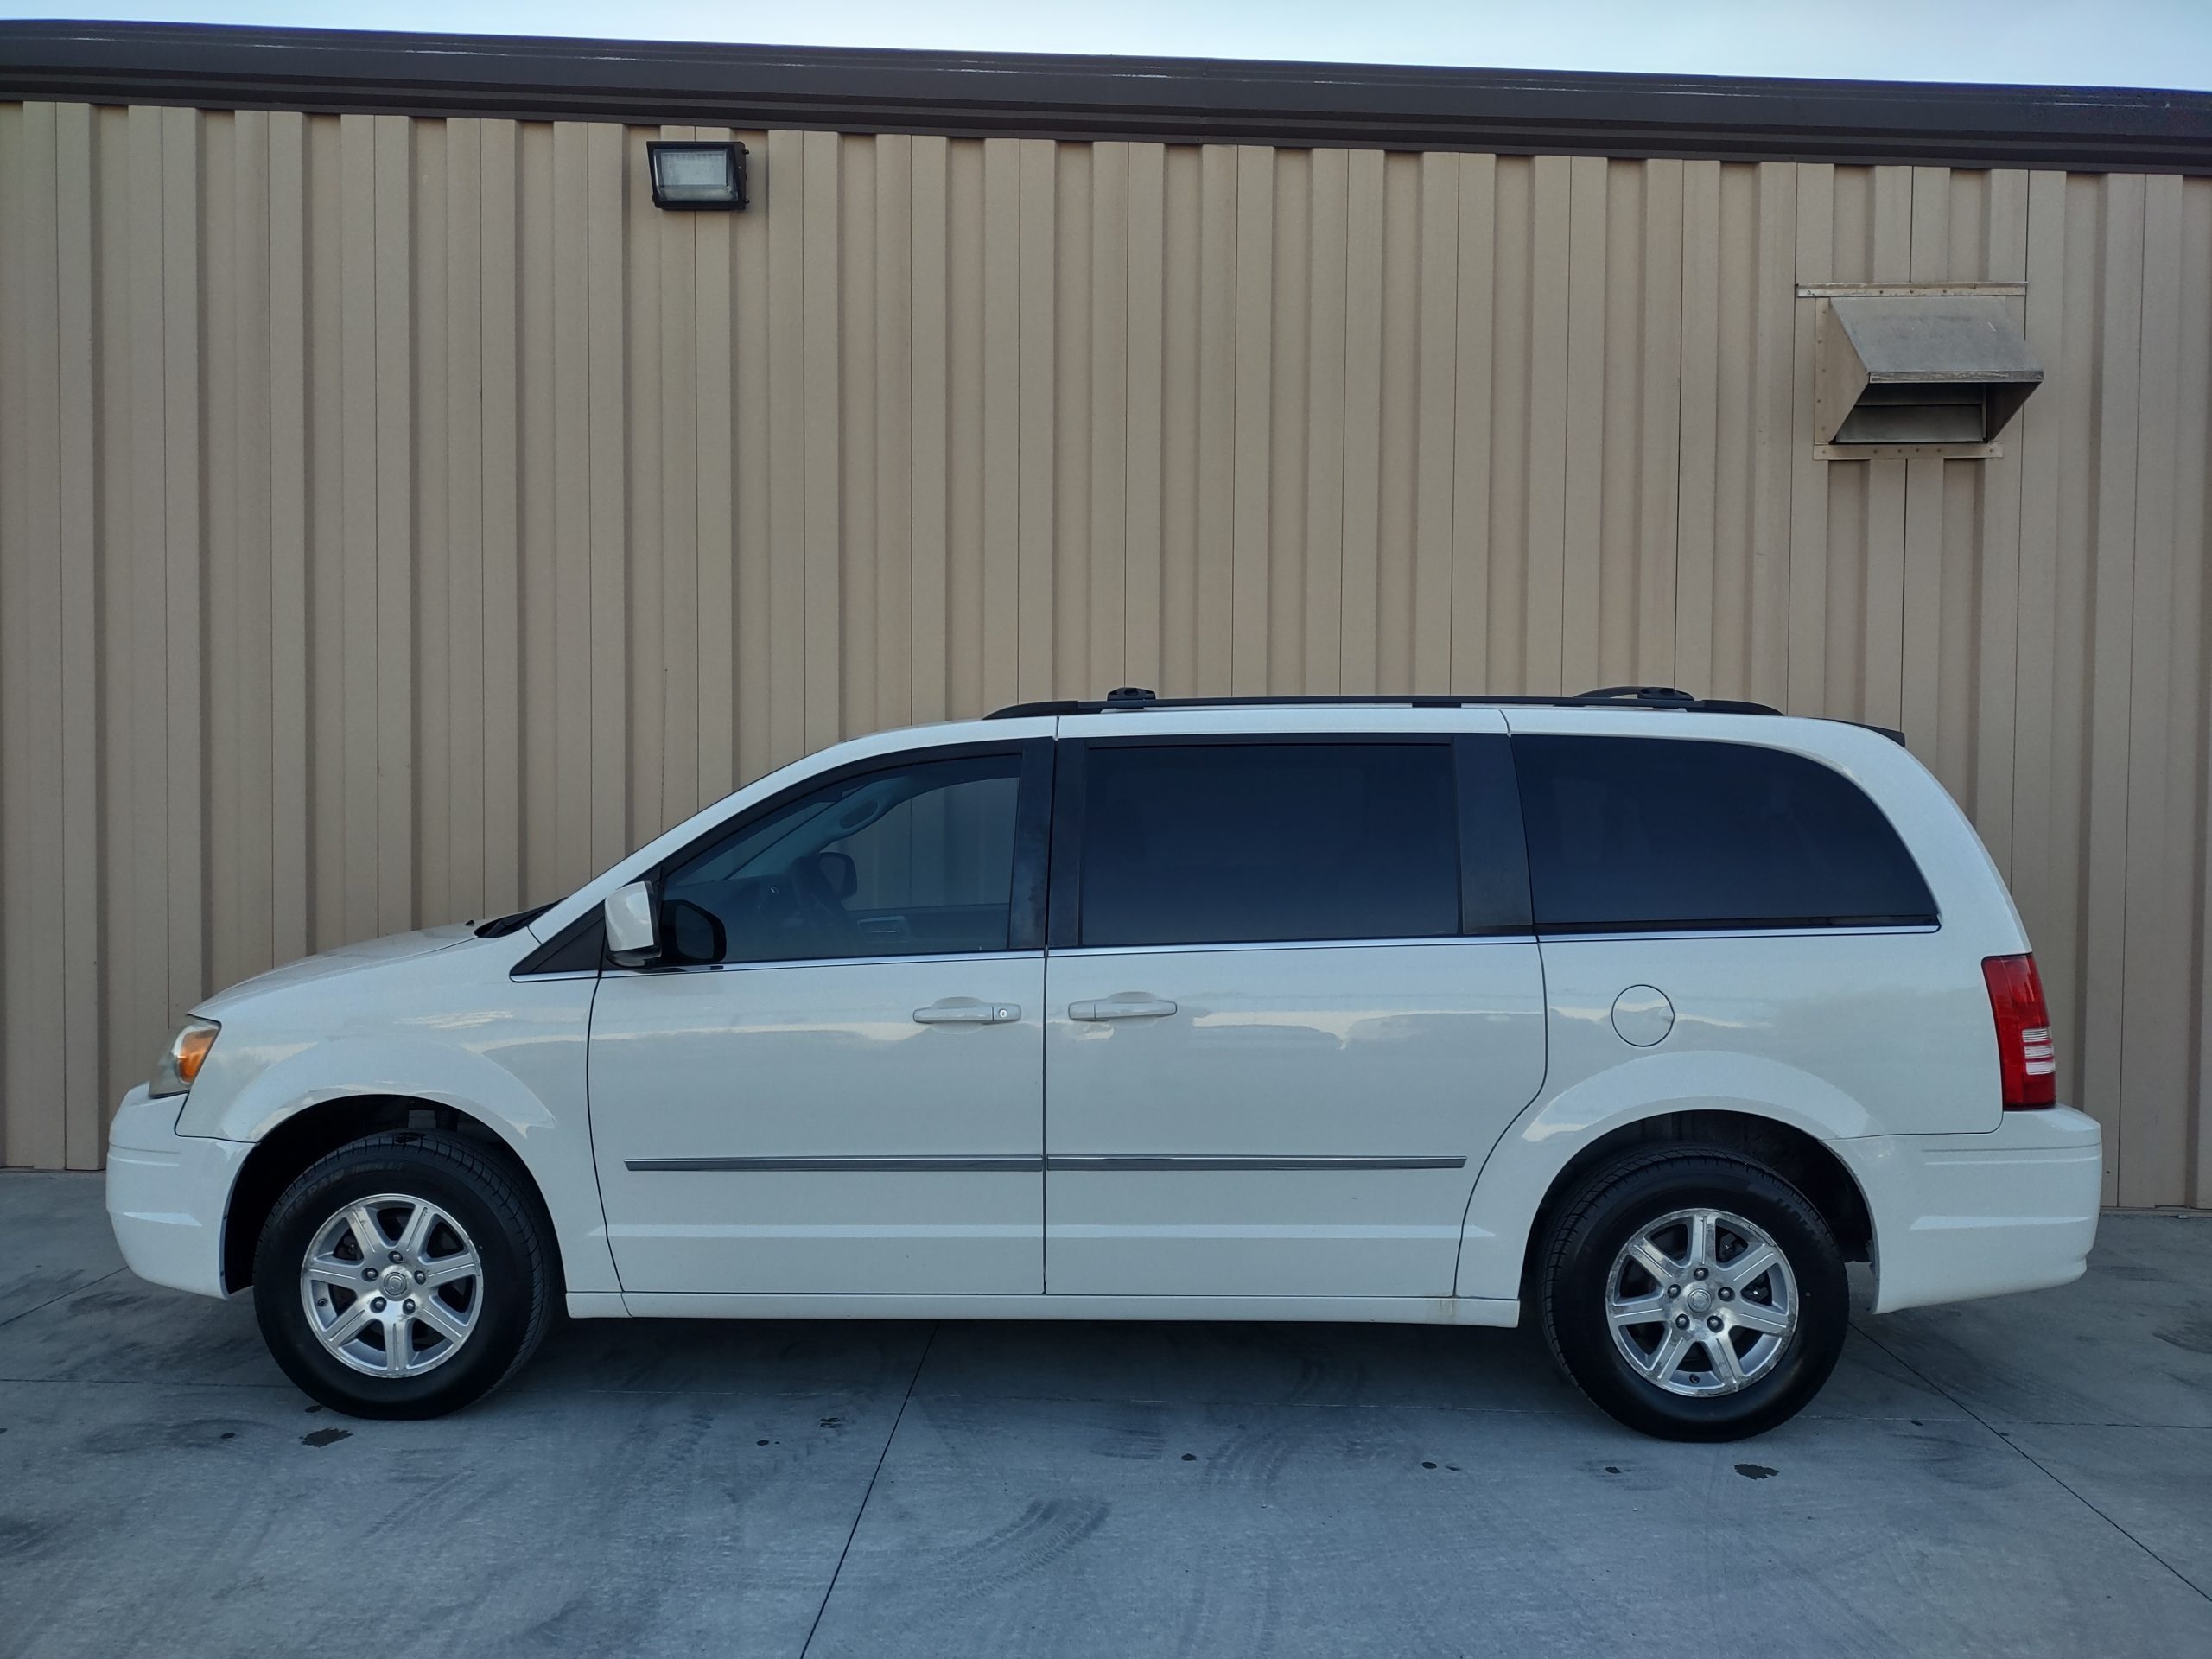 Used 2009 Chrysler Town & Country Touring Van for sale in 